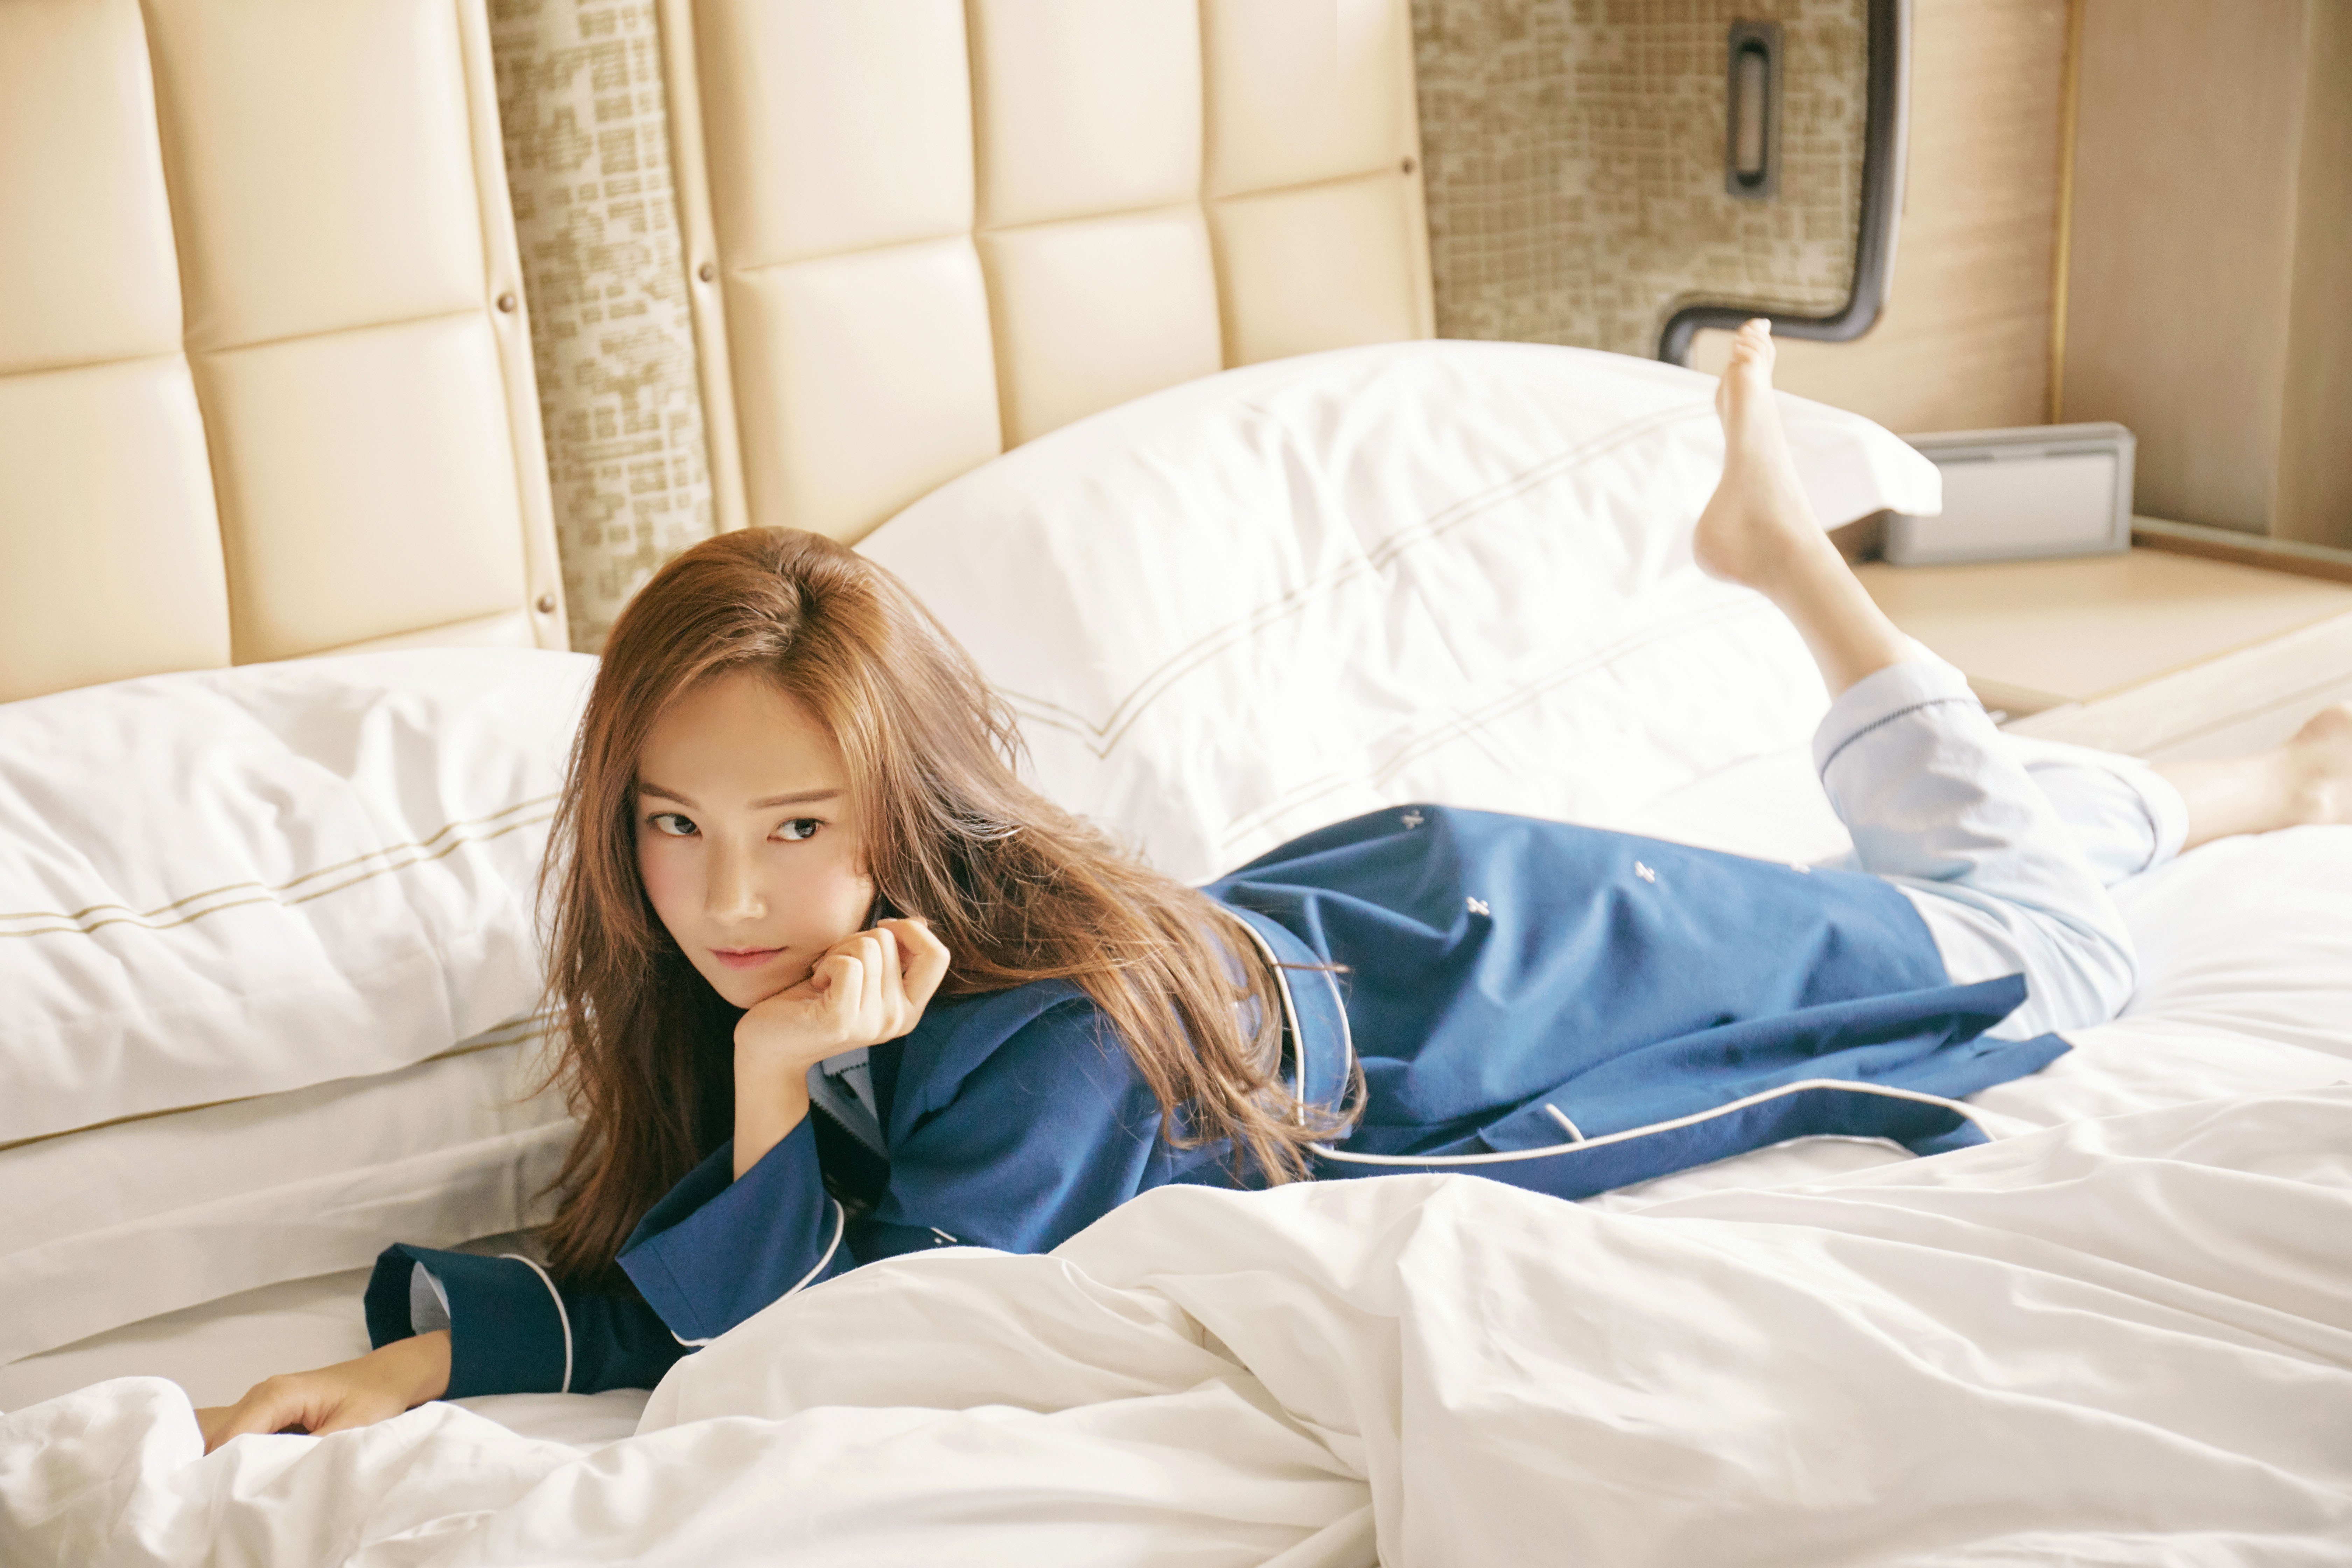 Jessica Jung, a former Girls’ Generation member, celebrates her birthday on April 18.